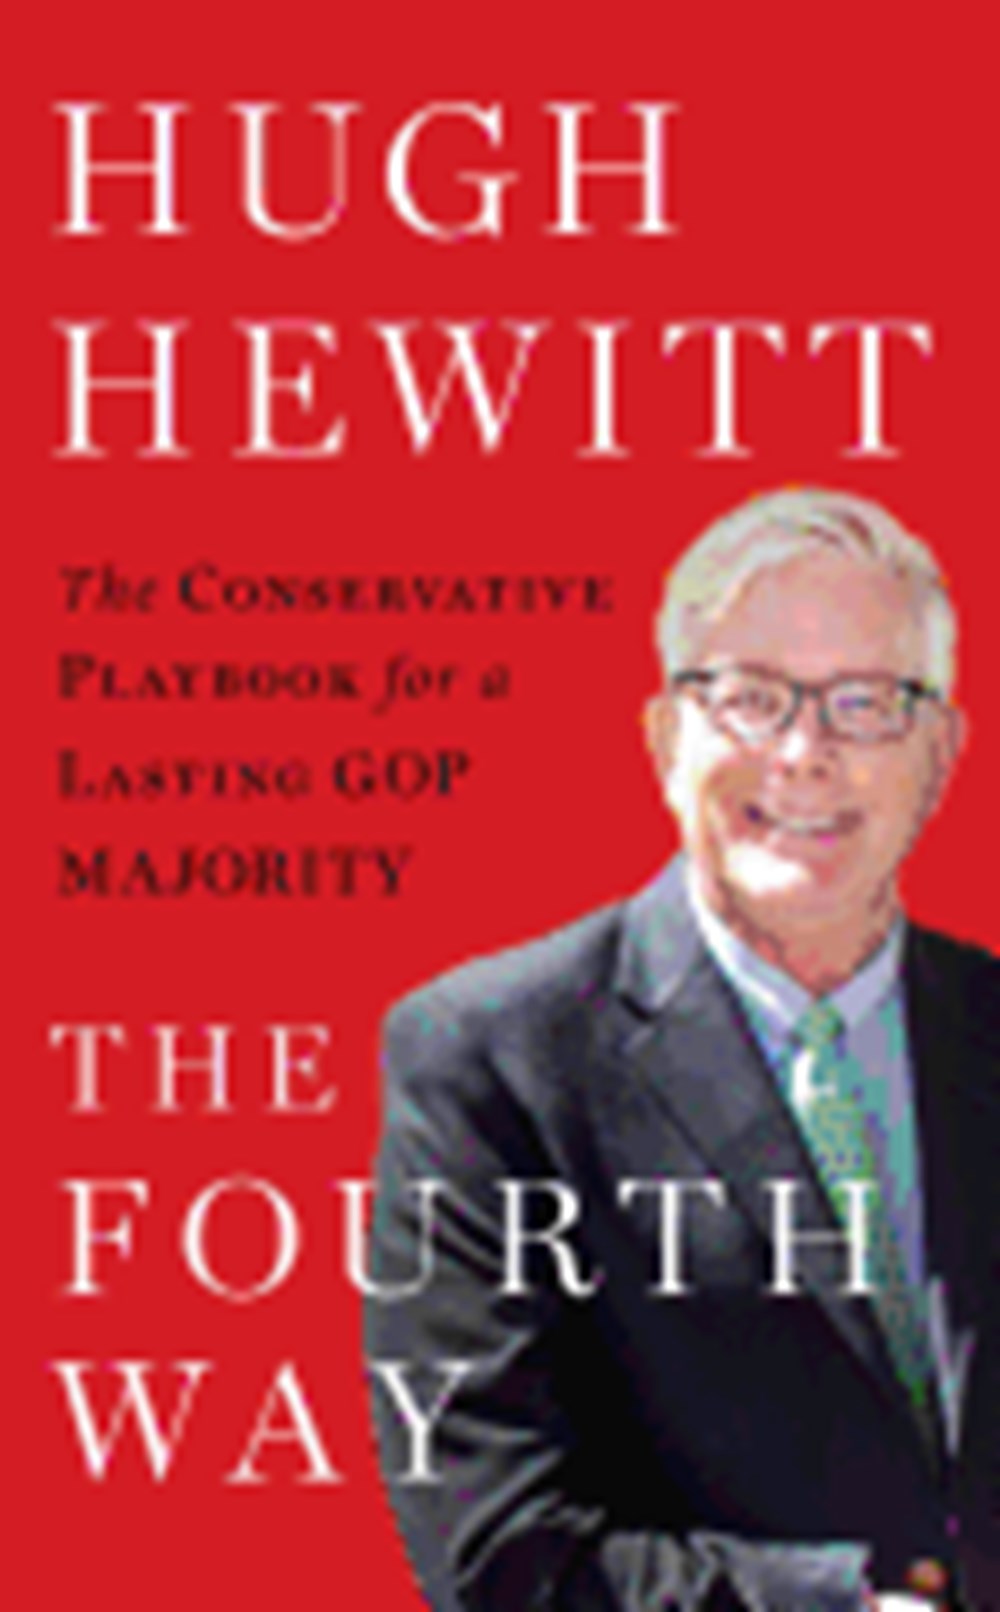 Fourth Way: The Conservative Playbook for a Lasting GOP Majority